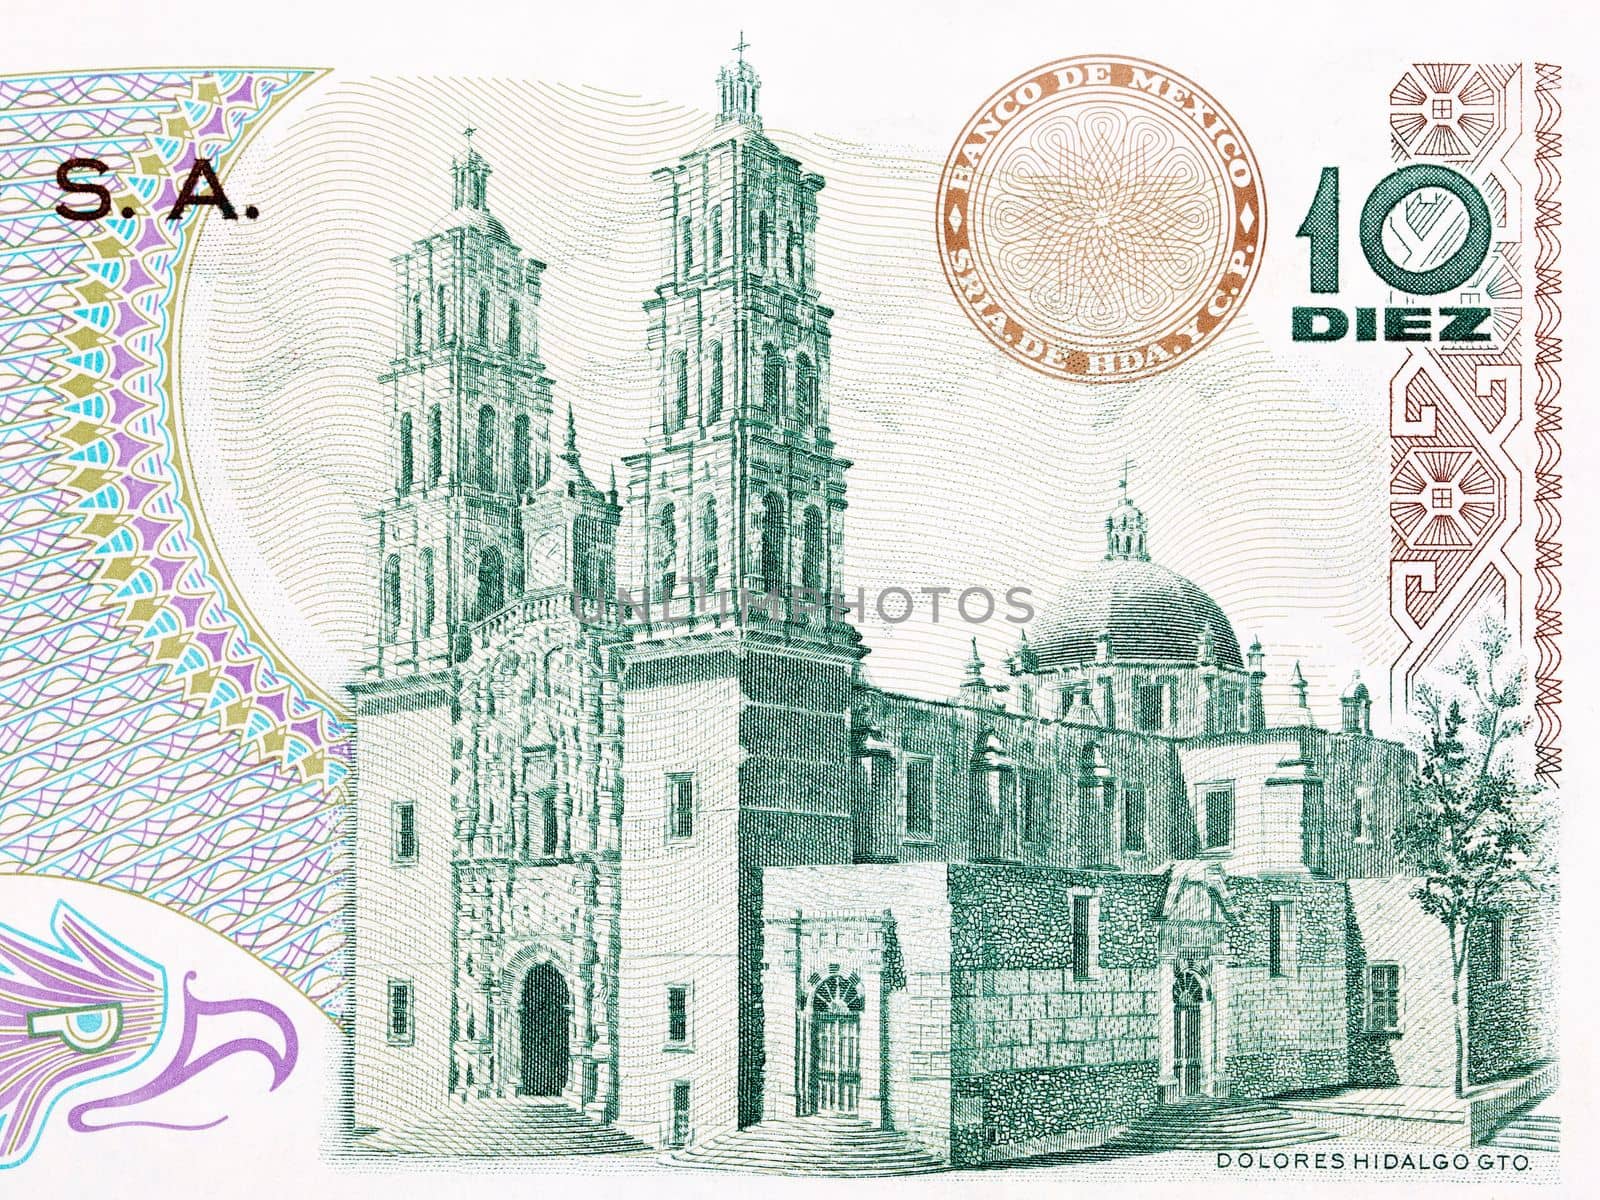 Cathedral in Dolores Hidalgo from old Mexican money by johan10